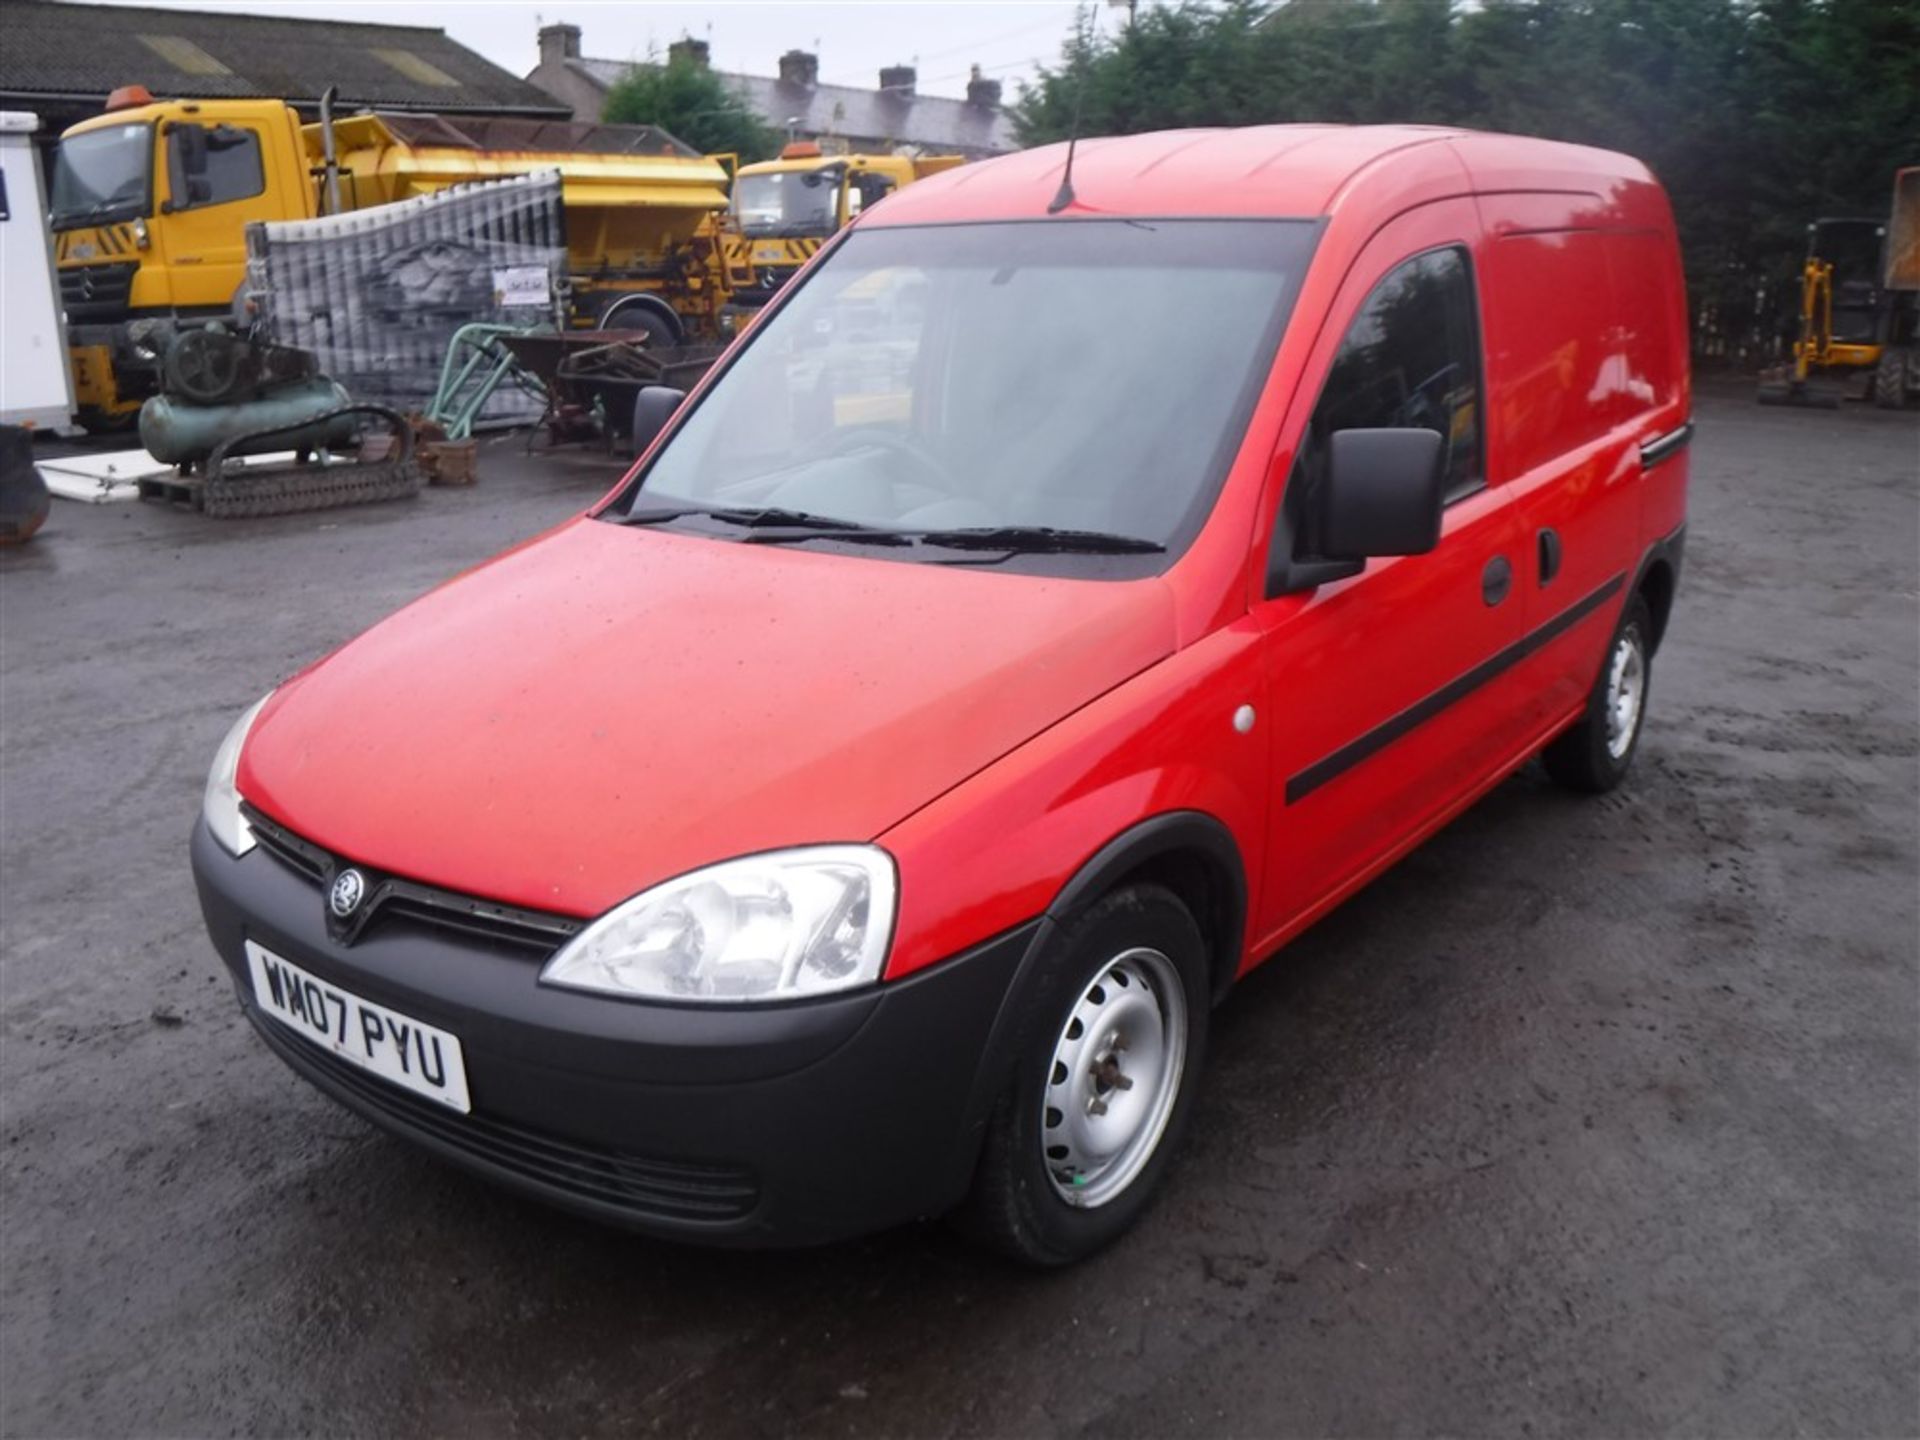 07 reg VAUXHALL COMBO 1700 CDTI VAN, 1ST REG 07/07, 130946M WARRANTED, V5 HERE, 1 OWNER FROM - Image 2 of 5